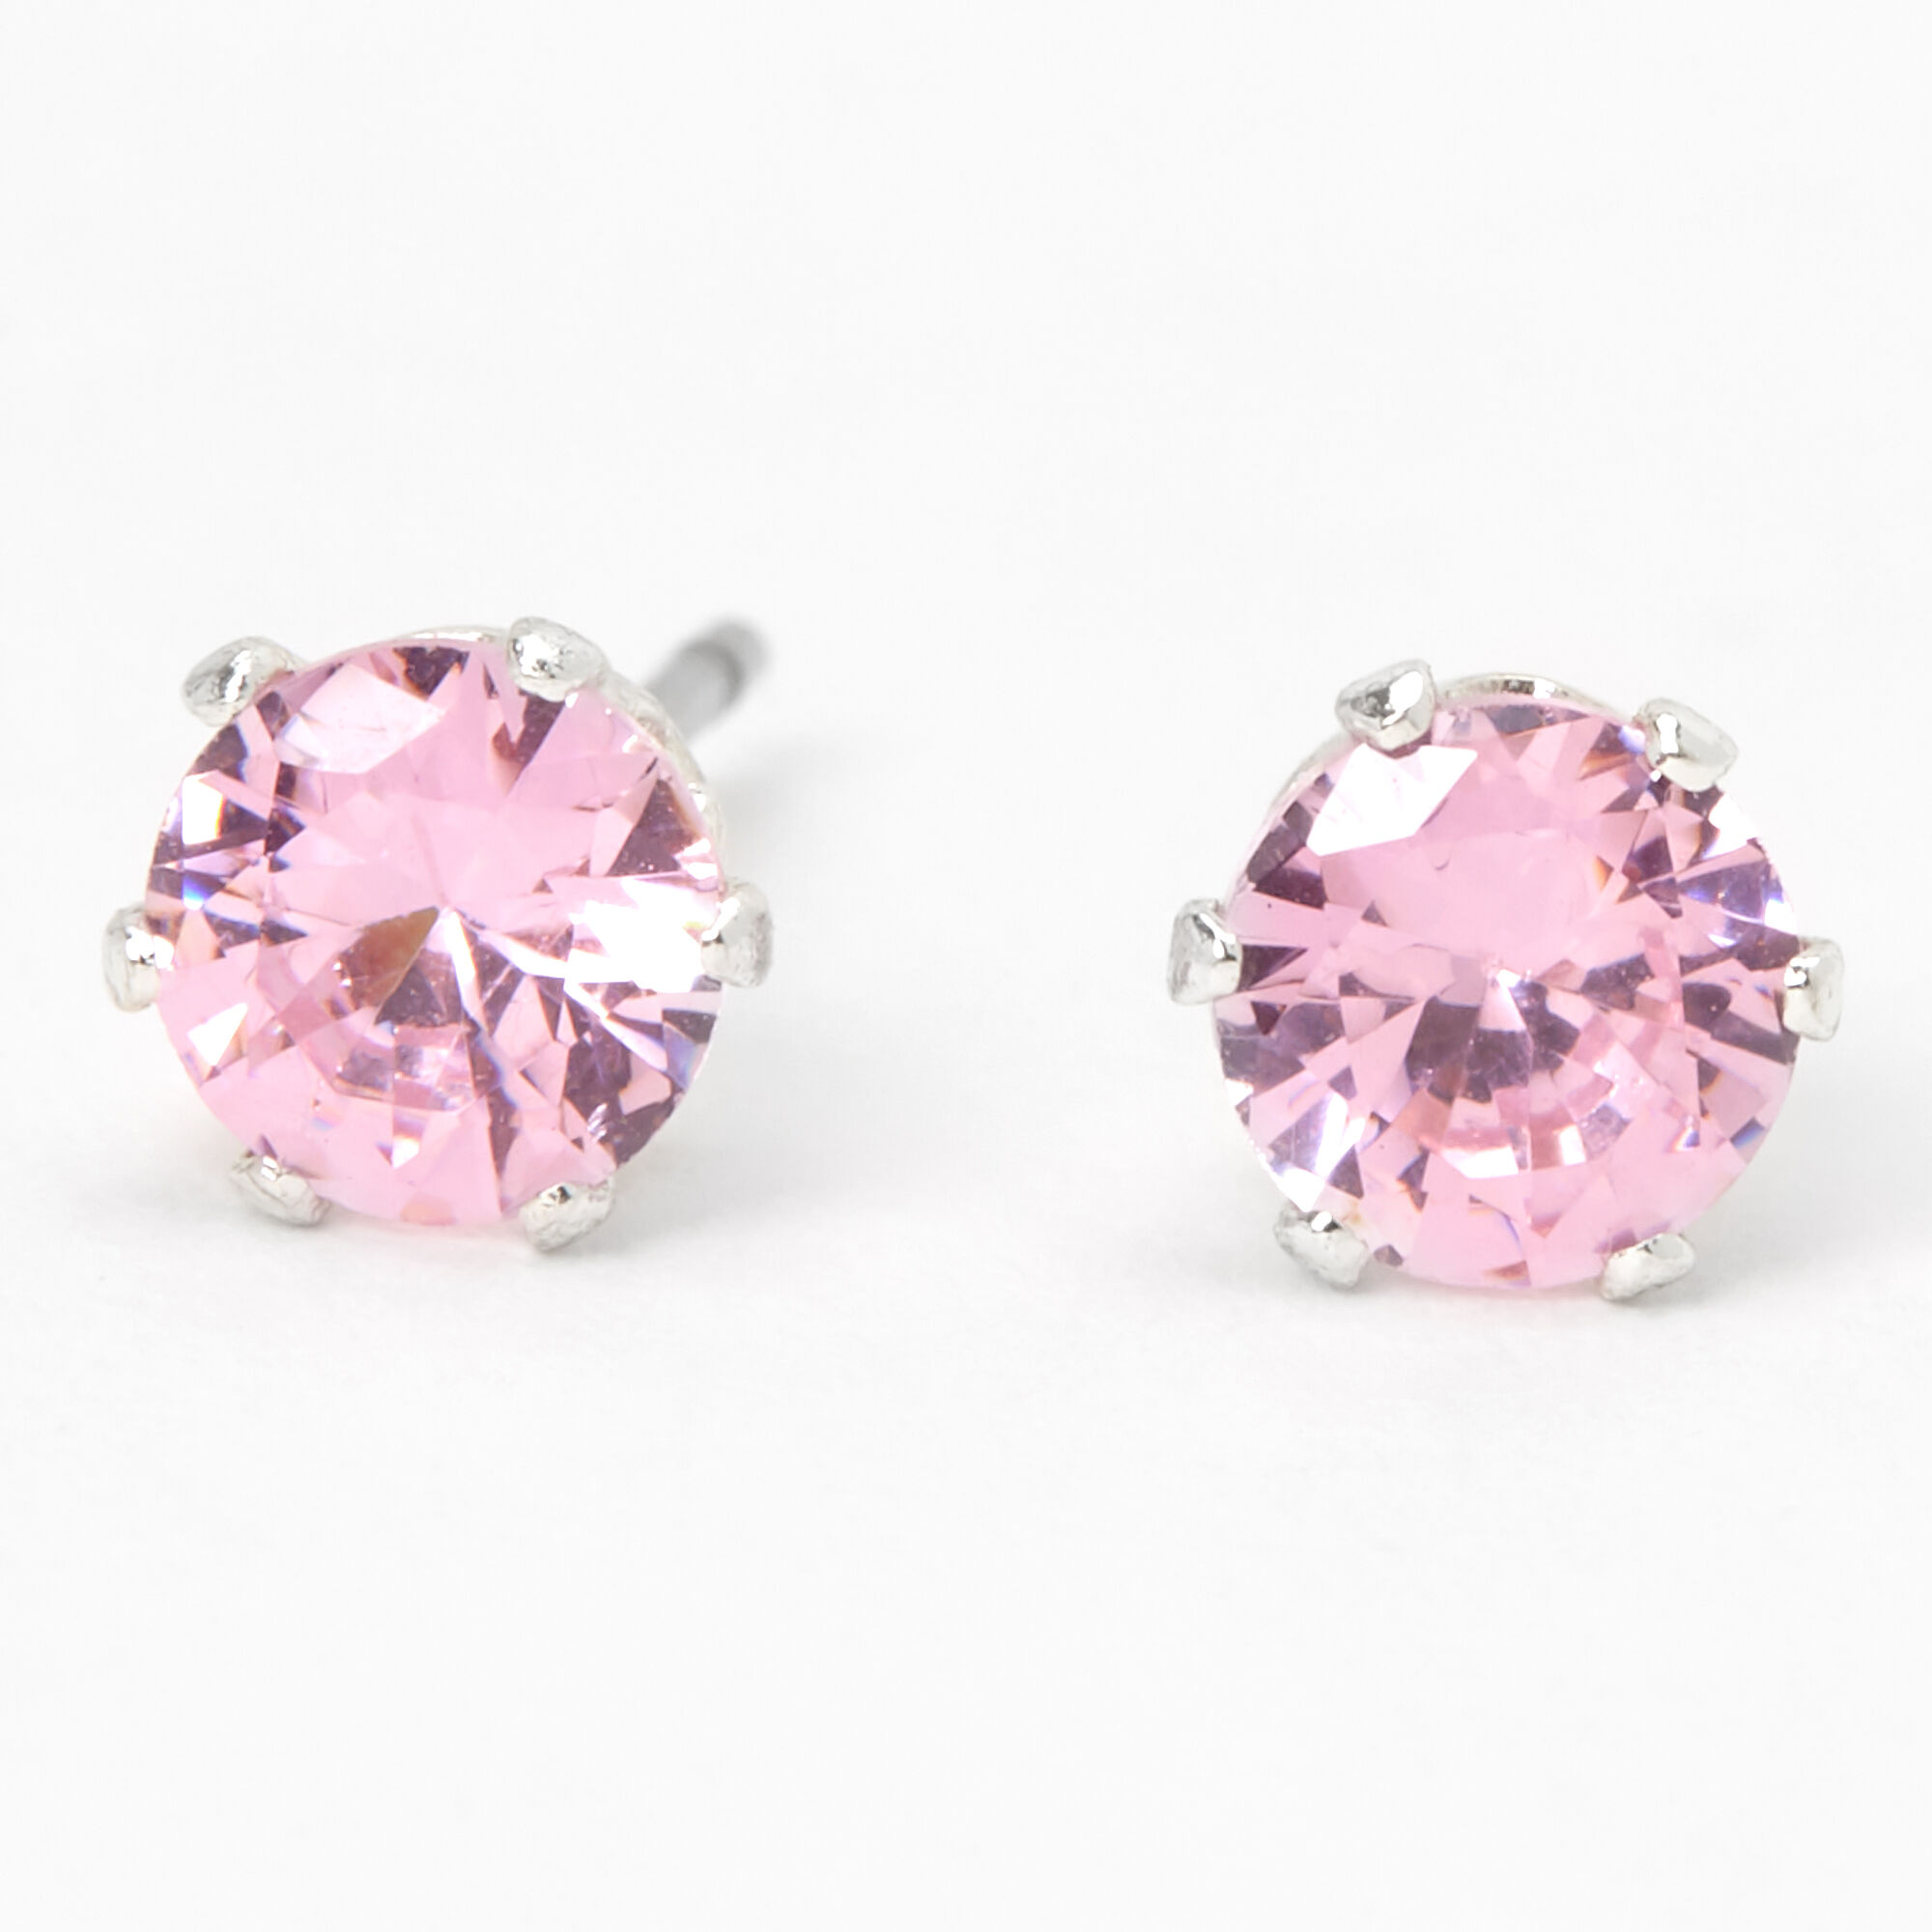 View Claires SilverTone Cubic Zirconia Round Stud Earrings 5MM Pink information